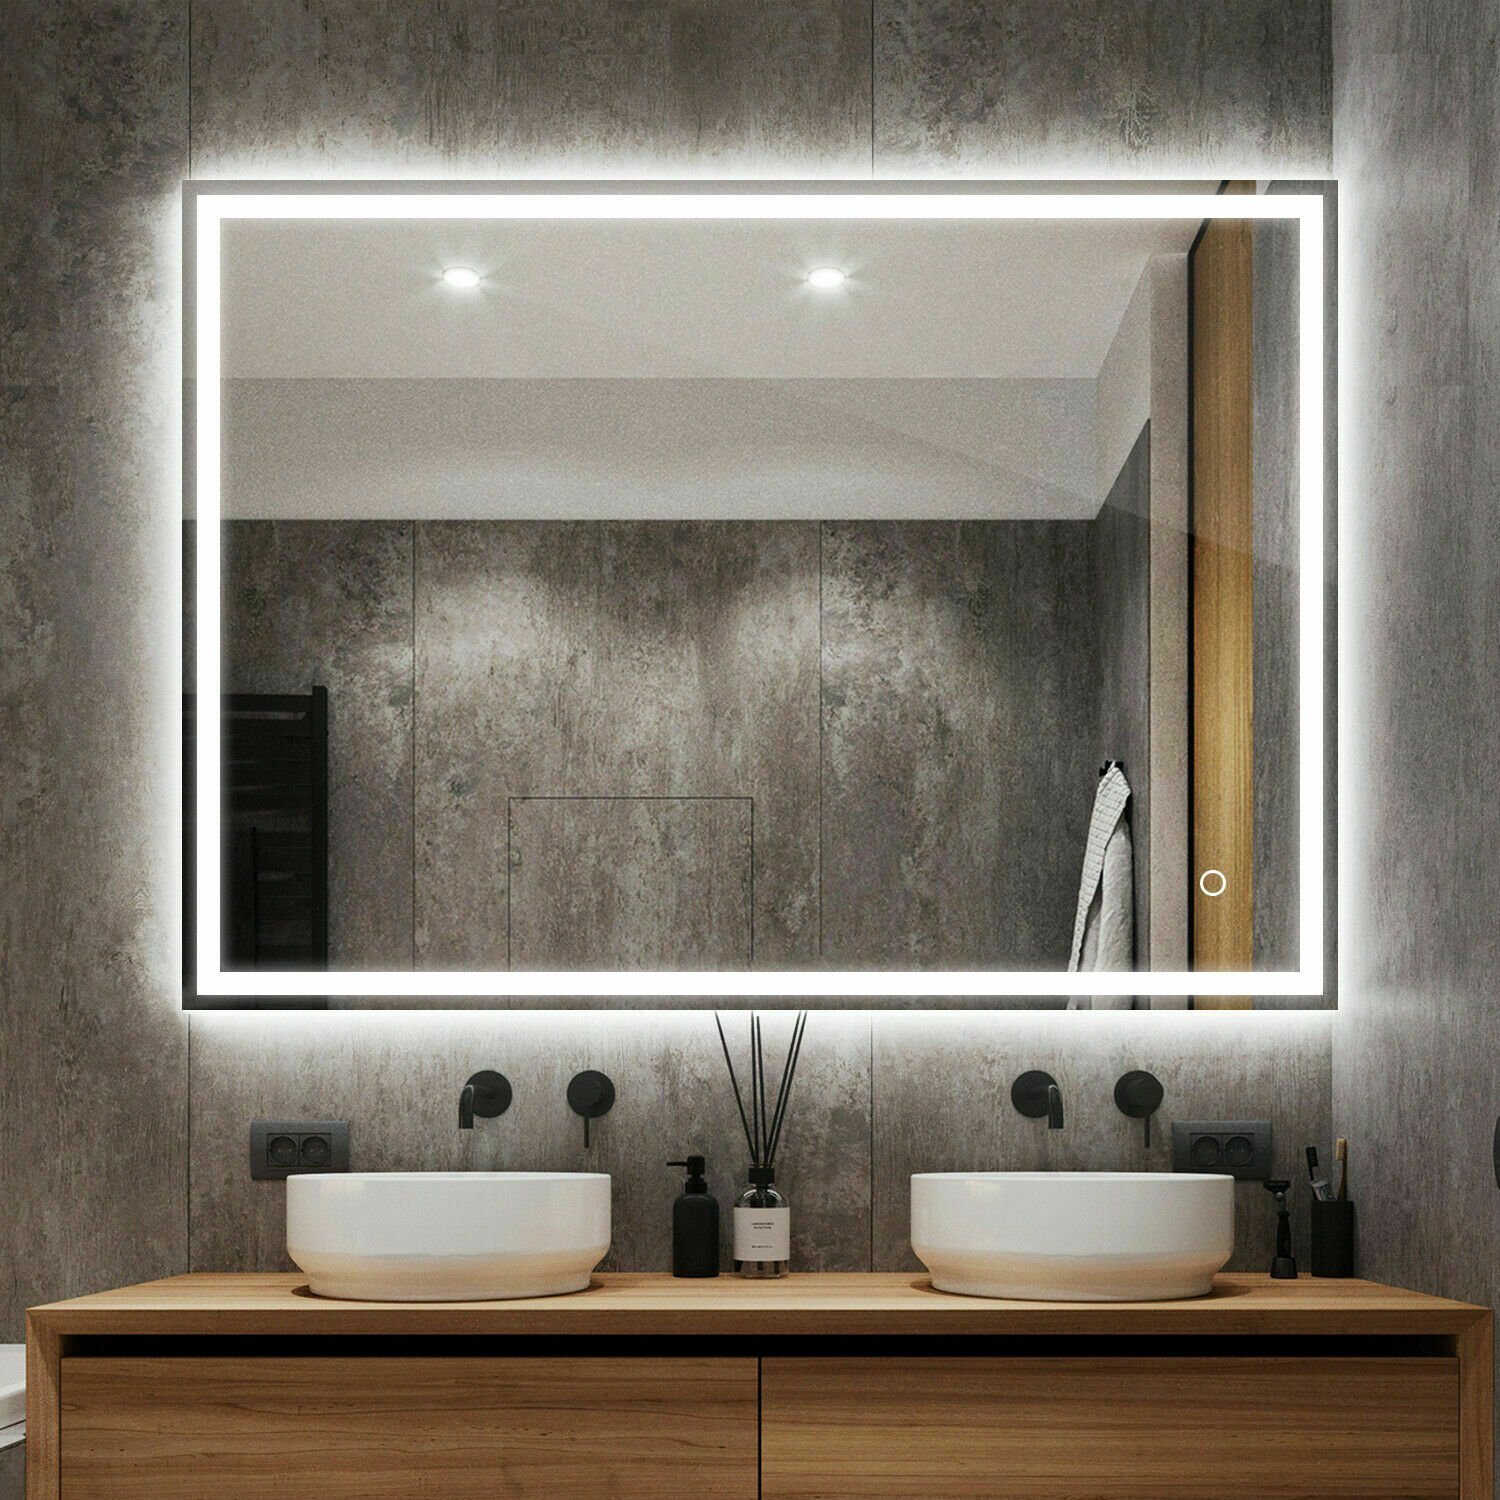 Image 1 - Bathroom LED Lighted Mirror Anti-fog Touch Button Wall Mounted Illuminated IP44